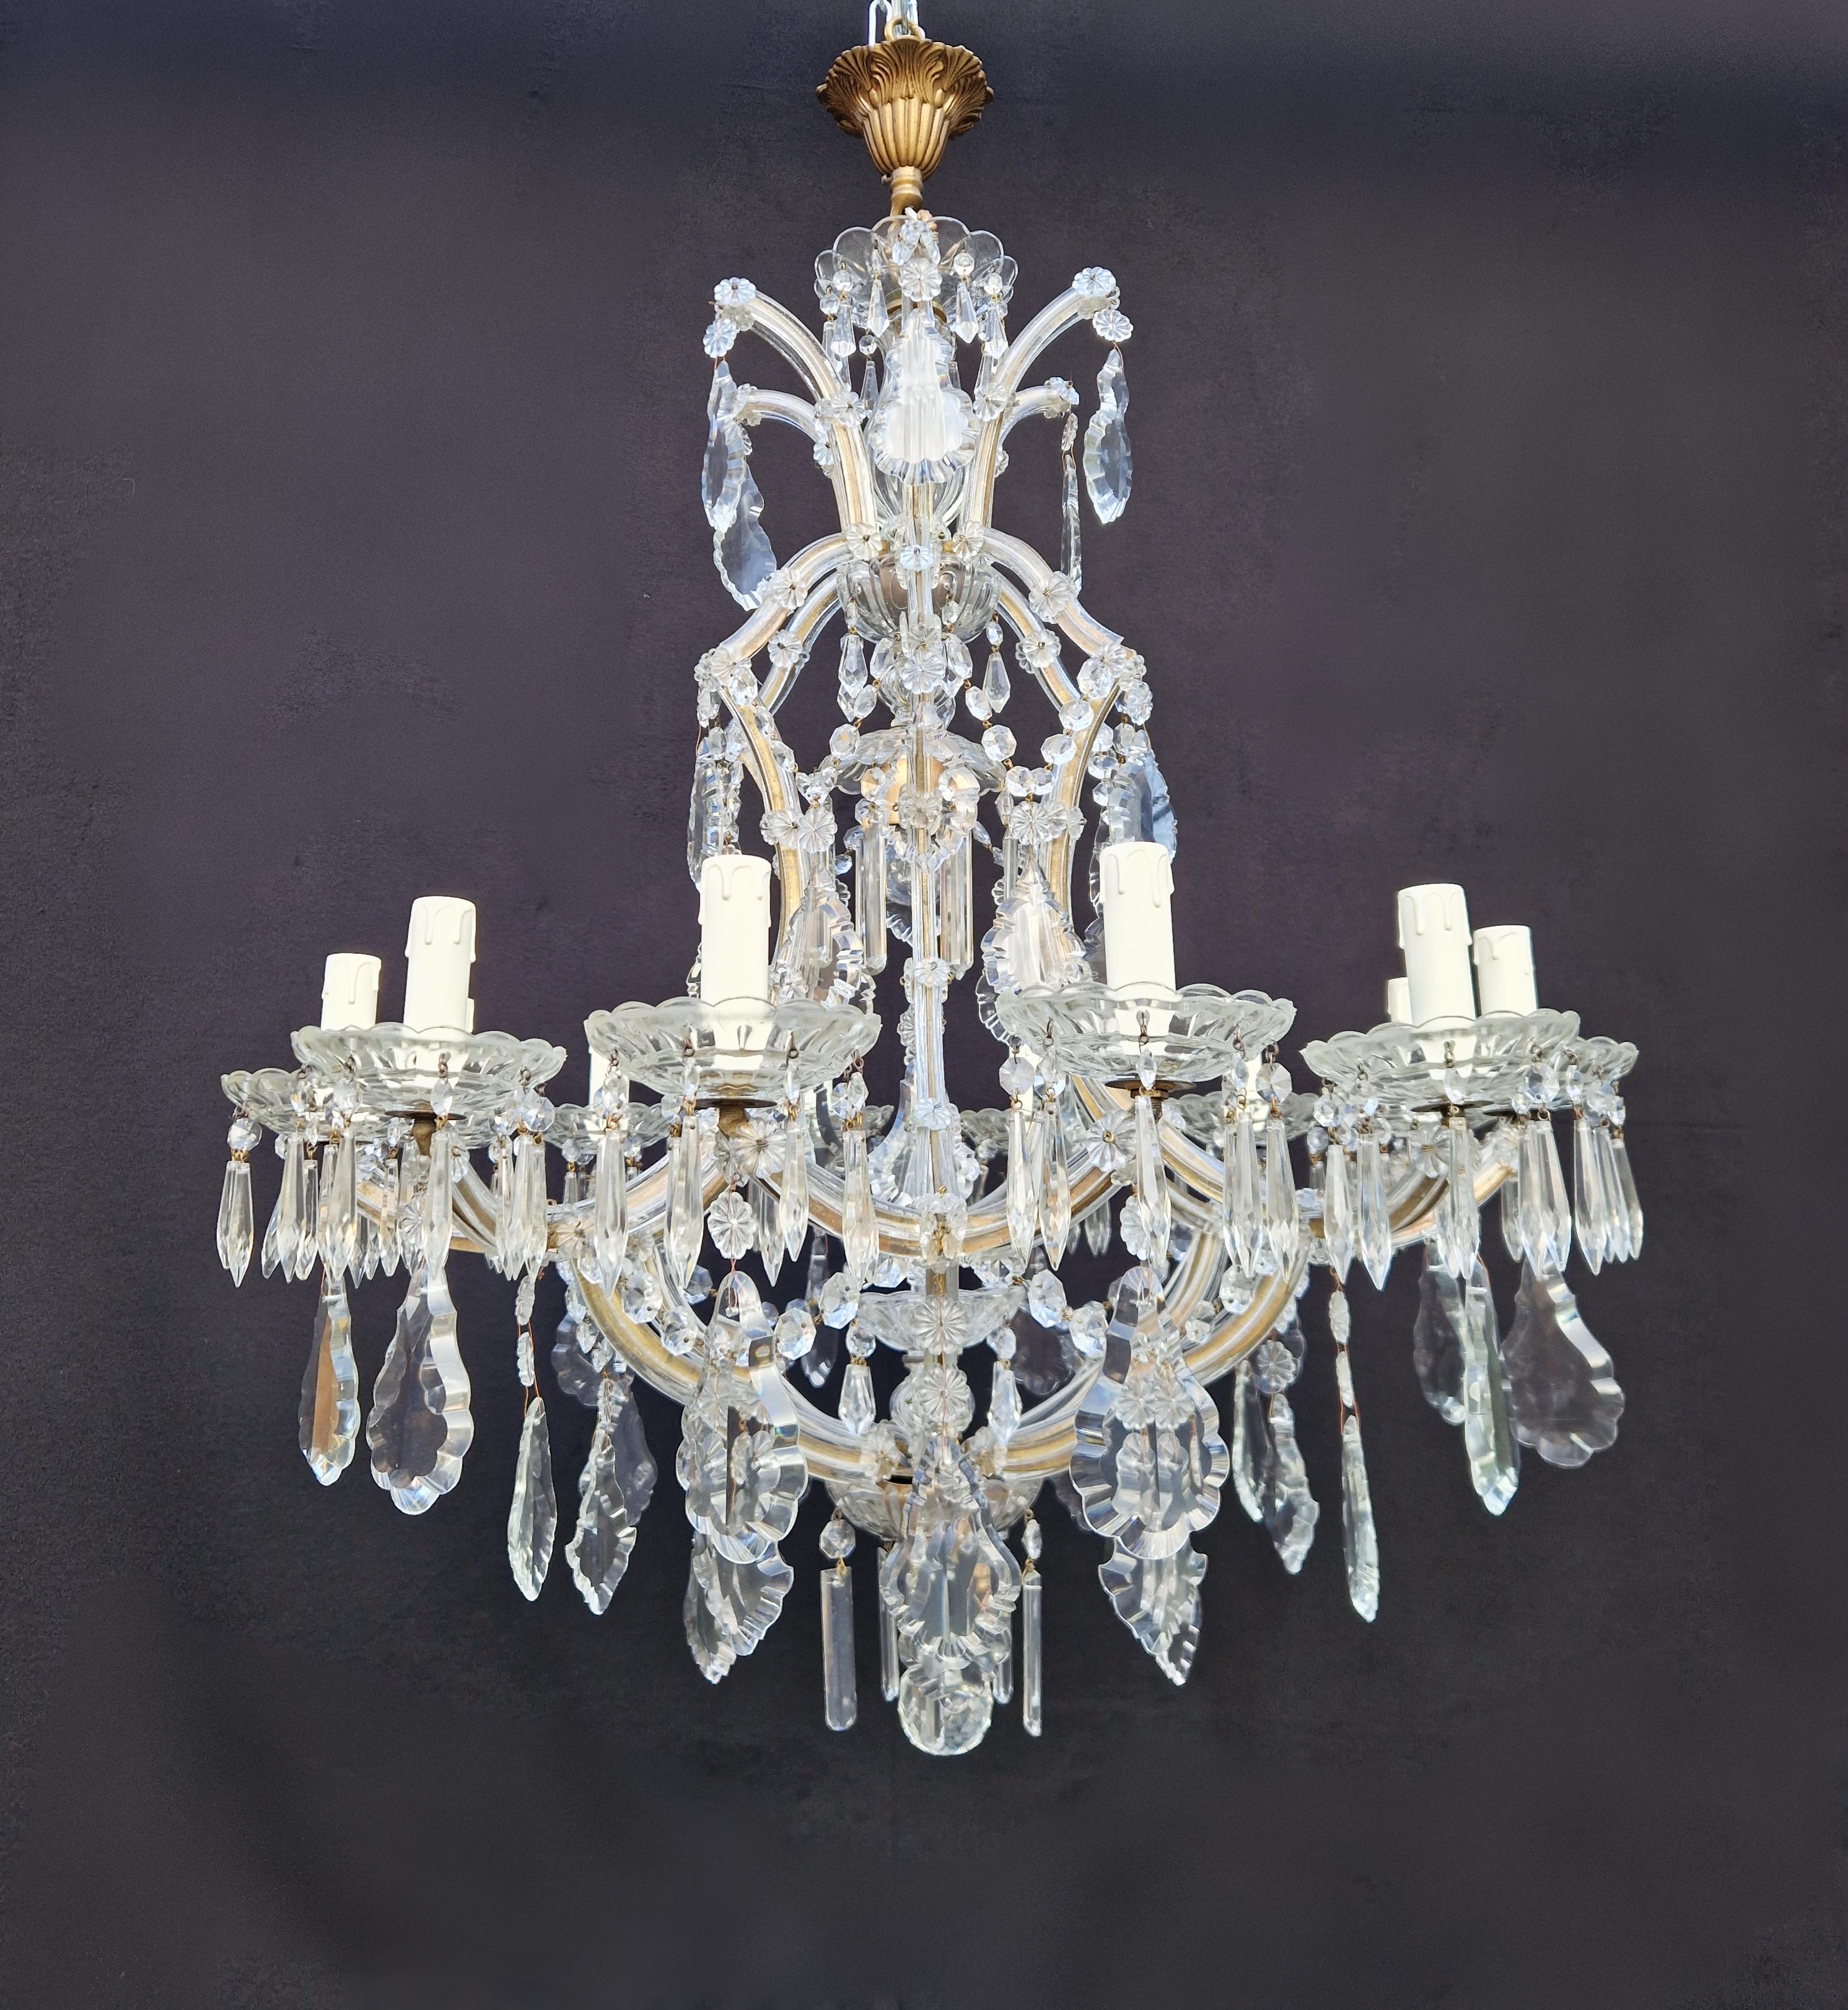 Baroque Maria Theresa Crystal Chandelier Antique Classic Clear Glass For Sale